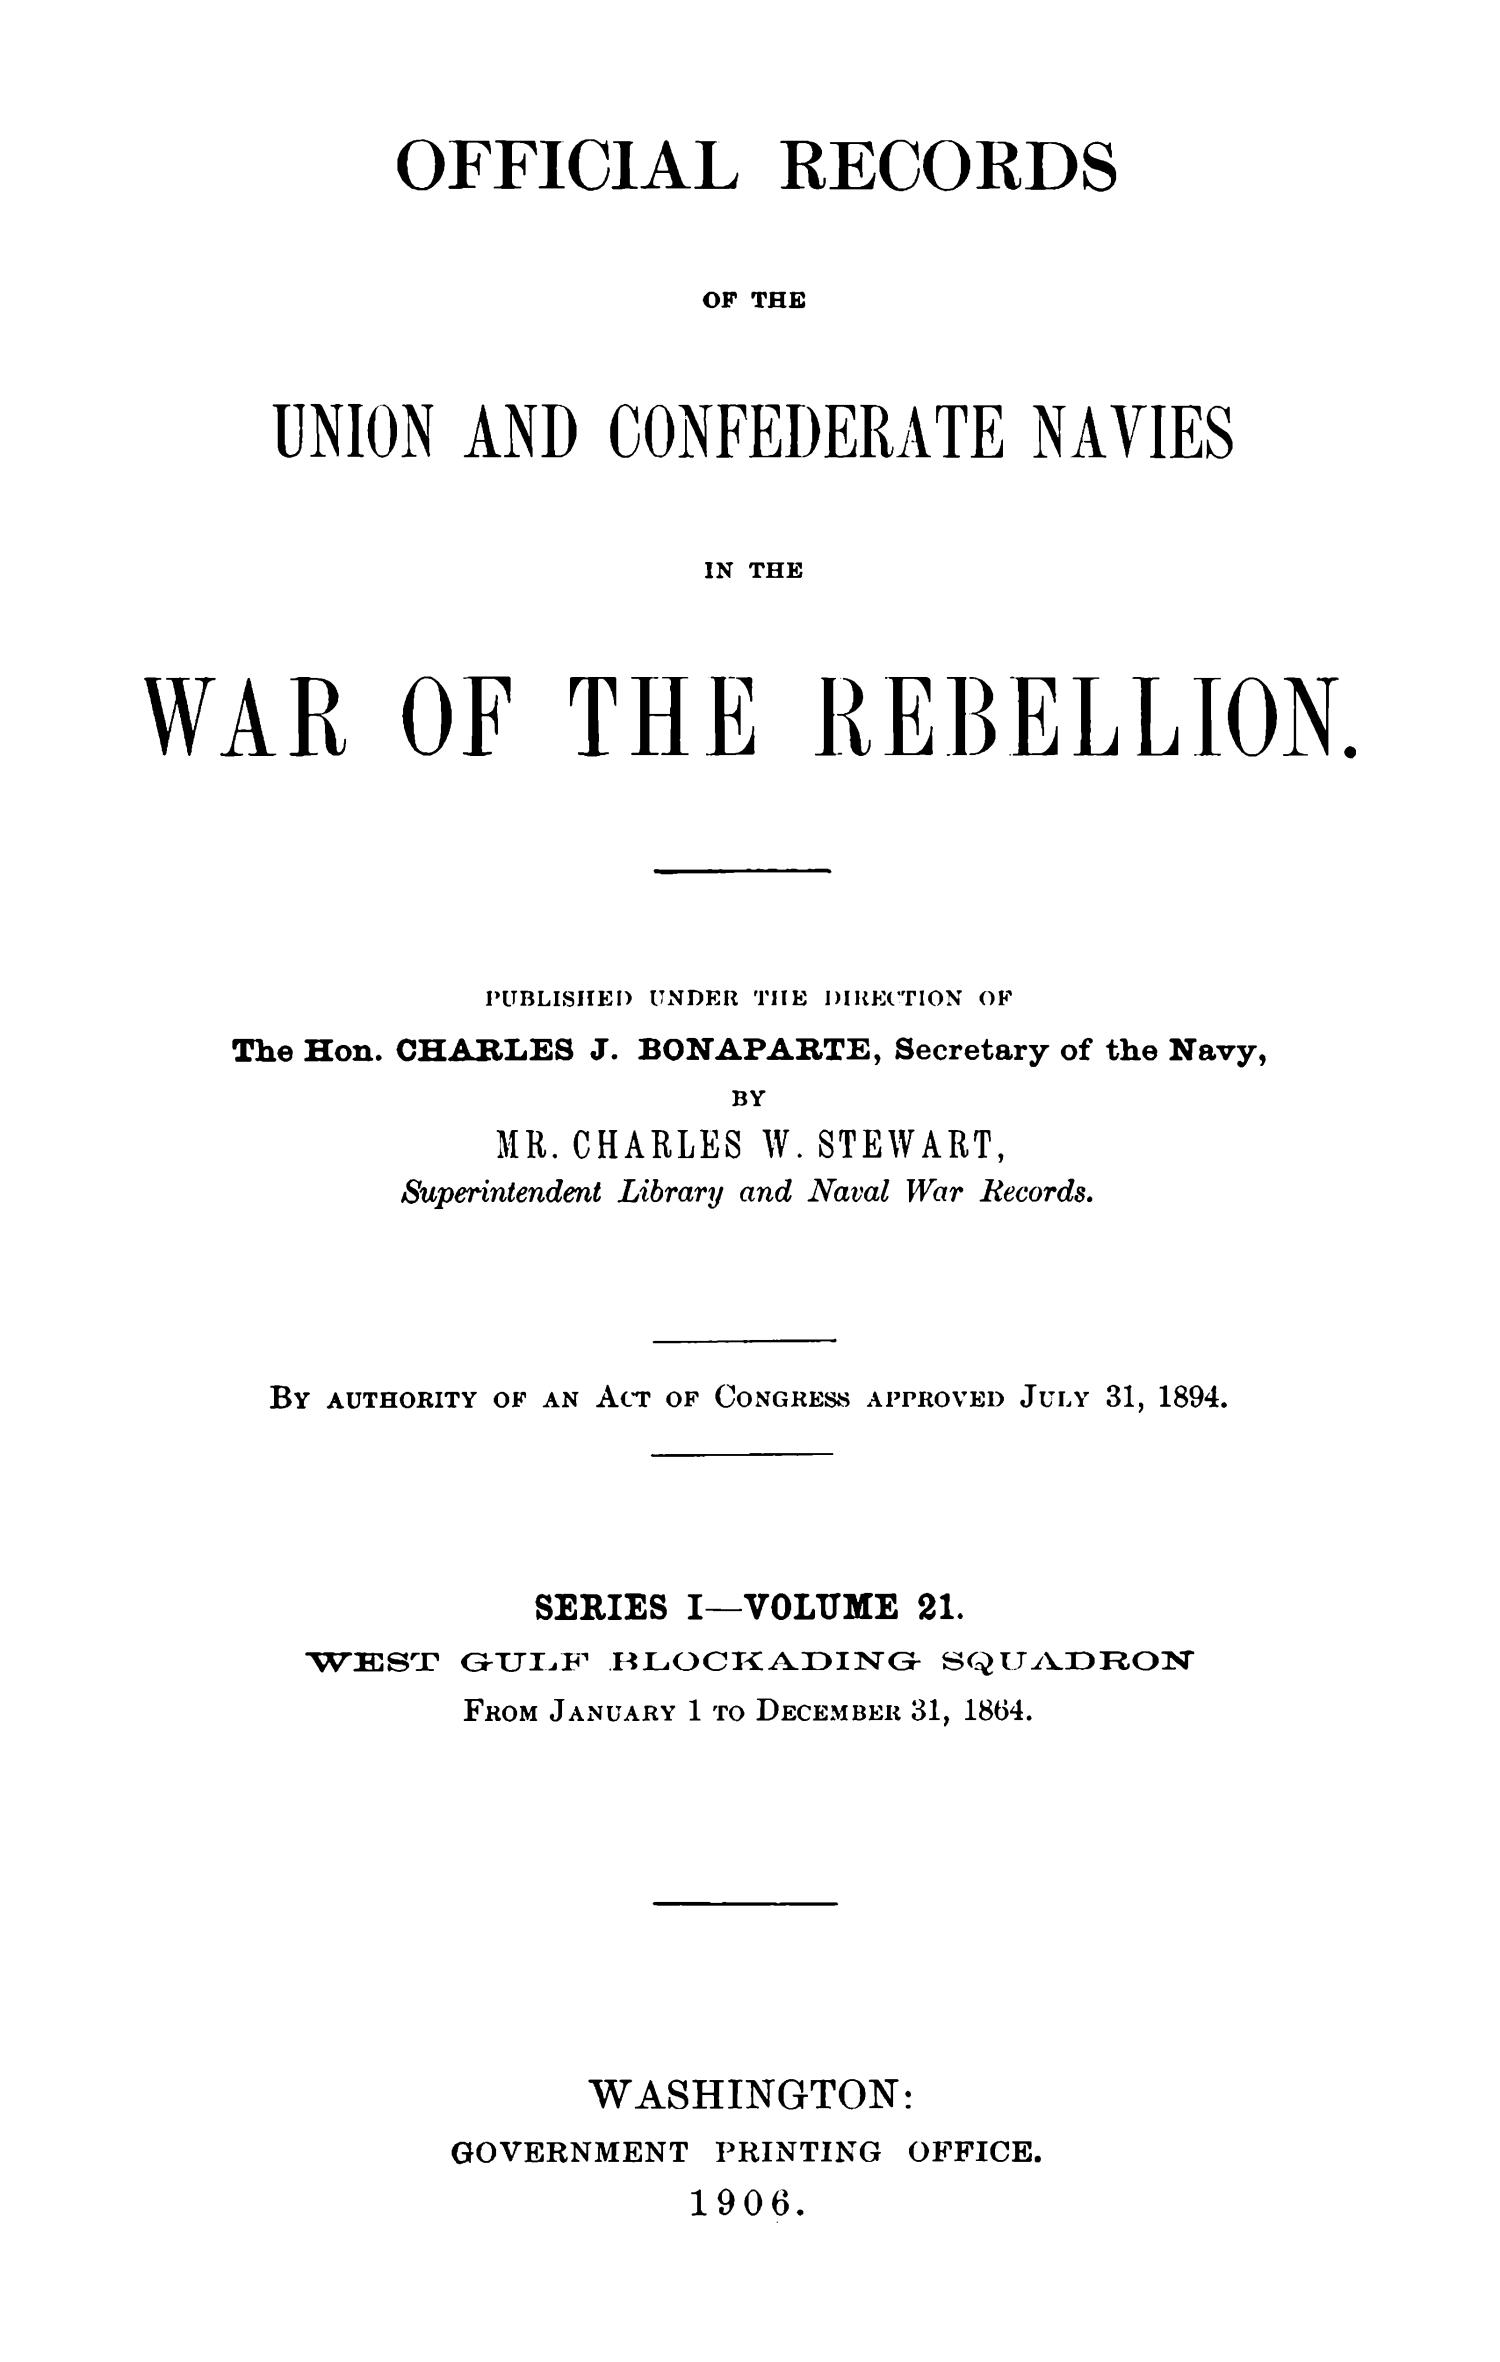 Official Records of the Union and Confederate Navies in the War of the Rebellion. Series 1, Volume 21.
                                                
                                                    Title Page
                                                